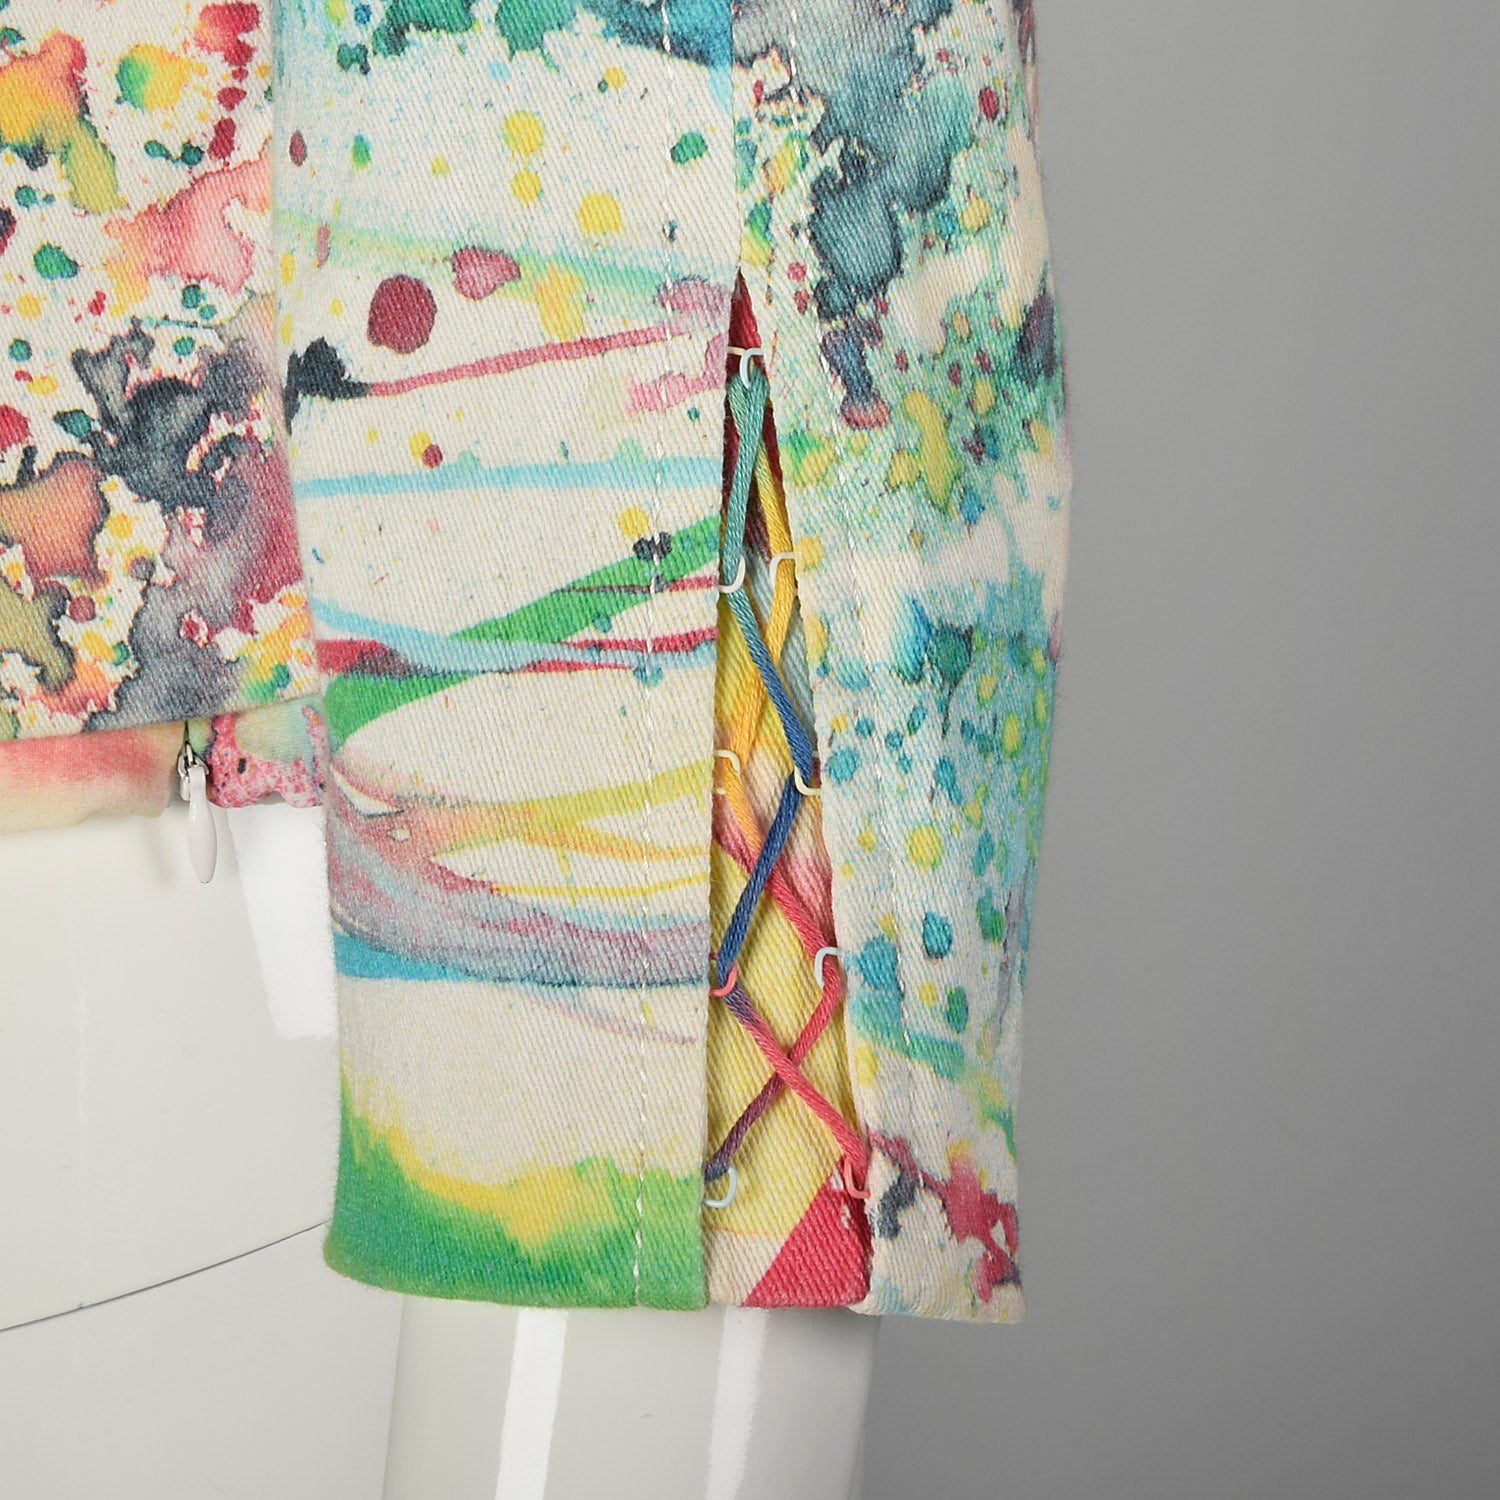 Alberto Makali Multi-Color Abstract Print Stretch Top and Matching Jean Jacket Set